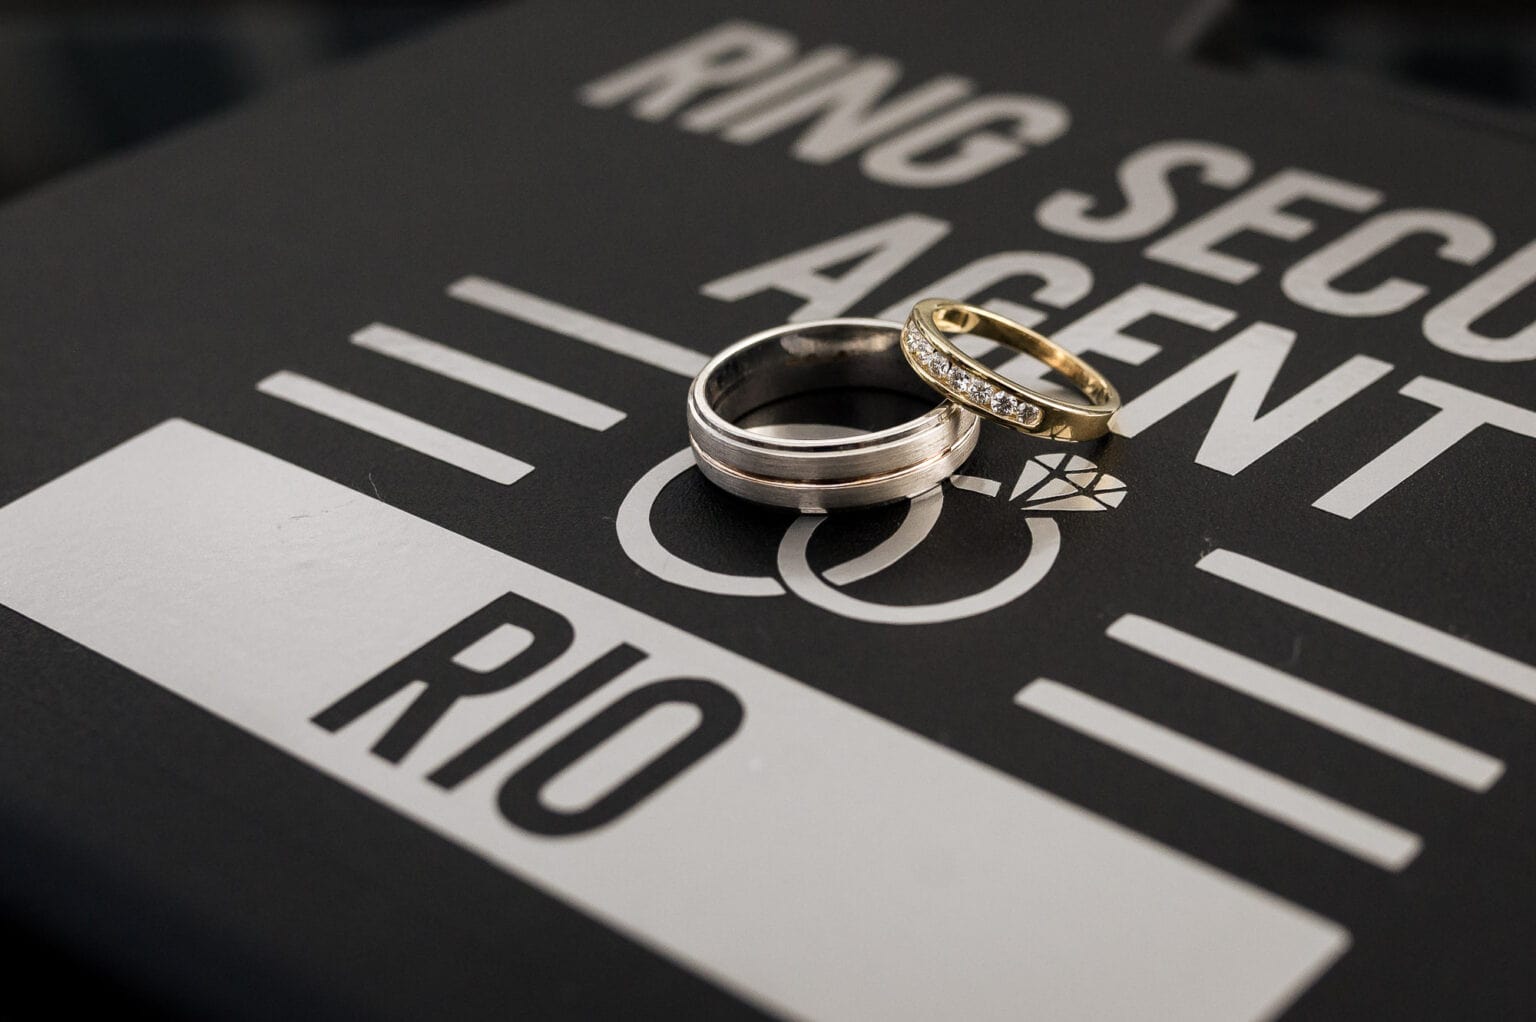 The wedding rings and their security suitcase